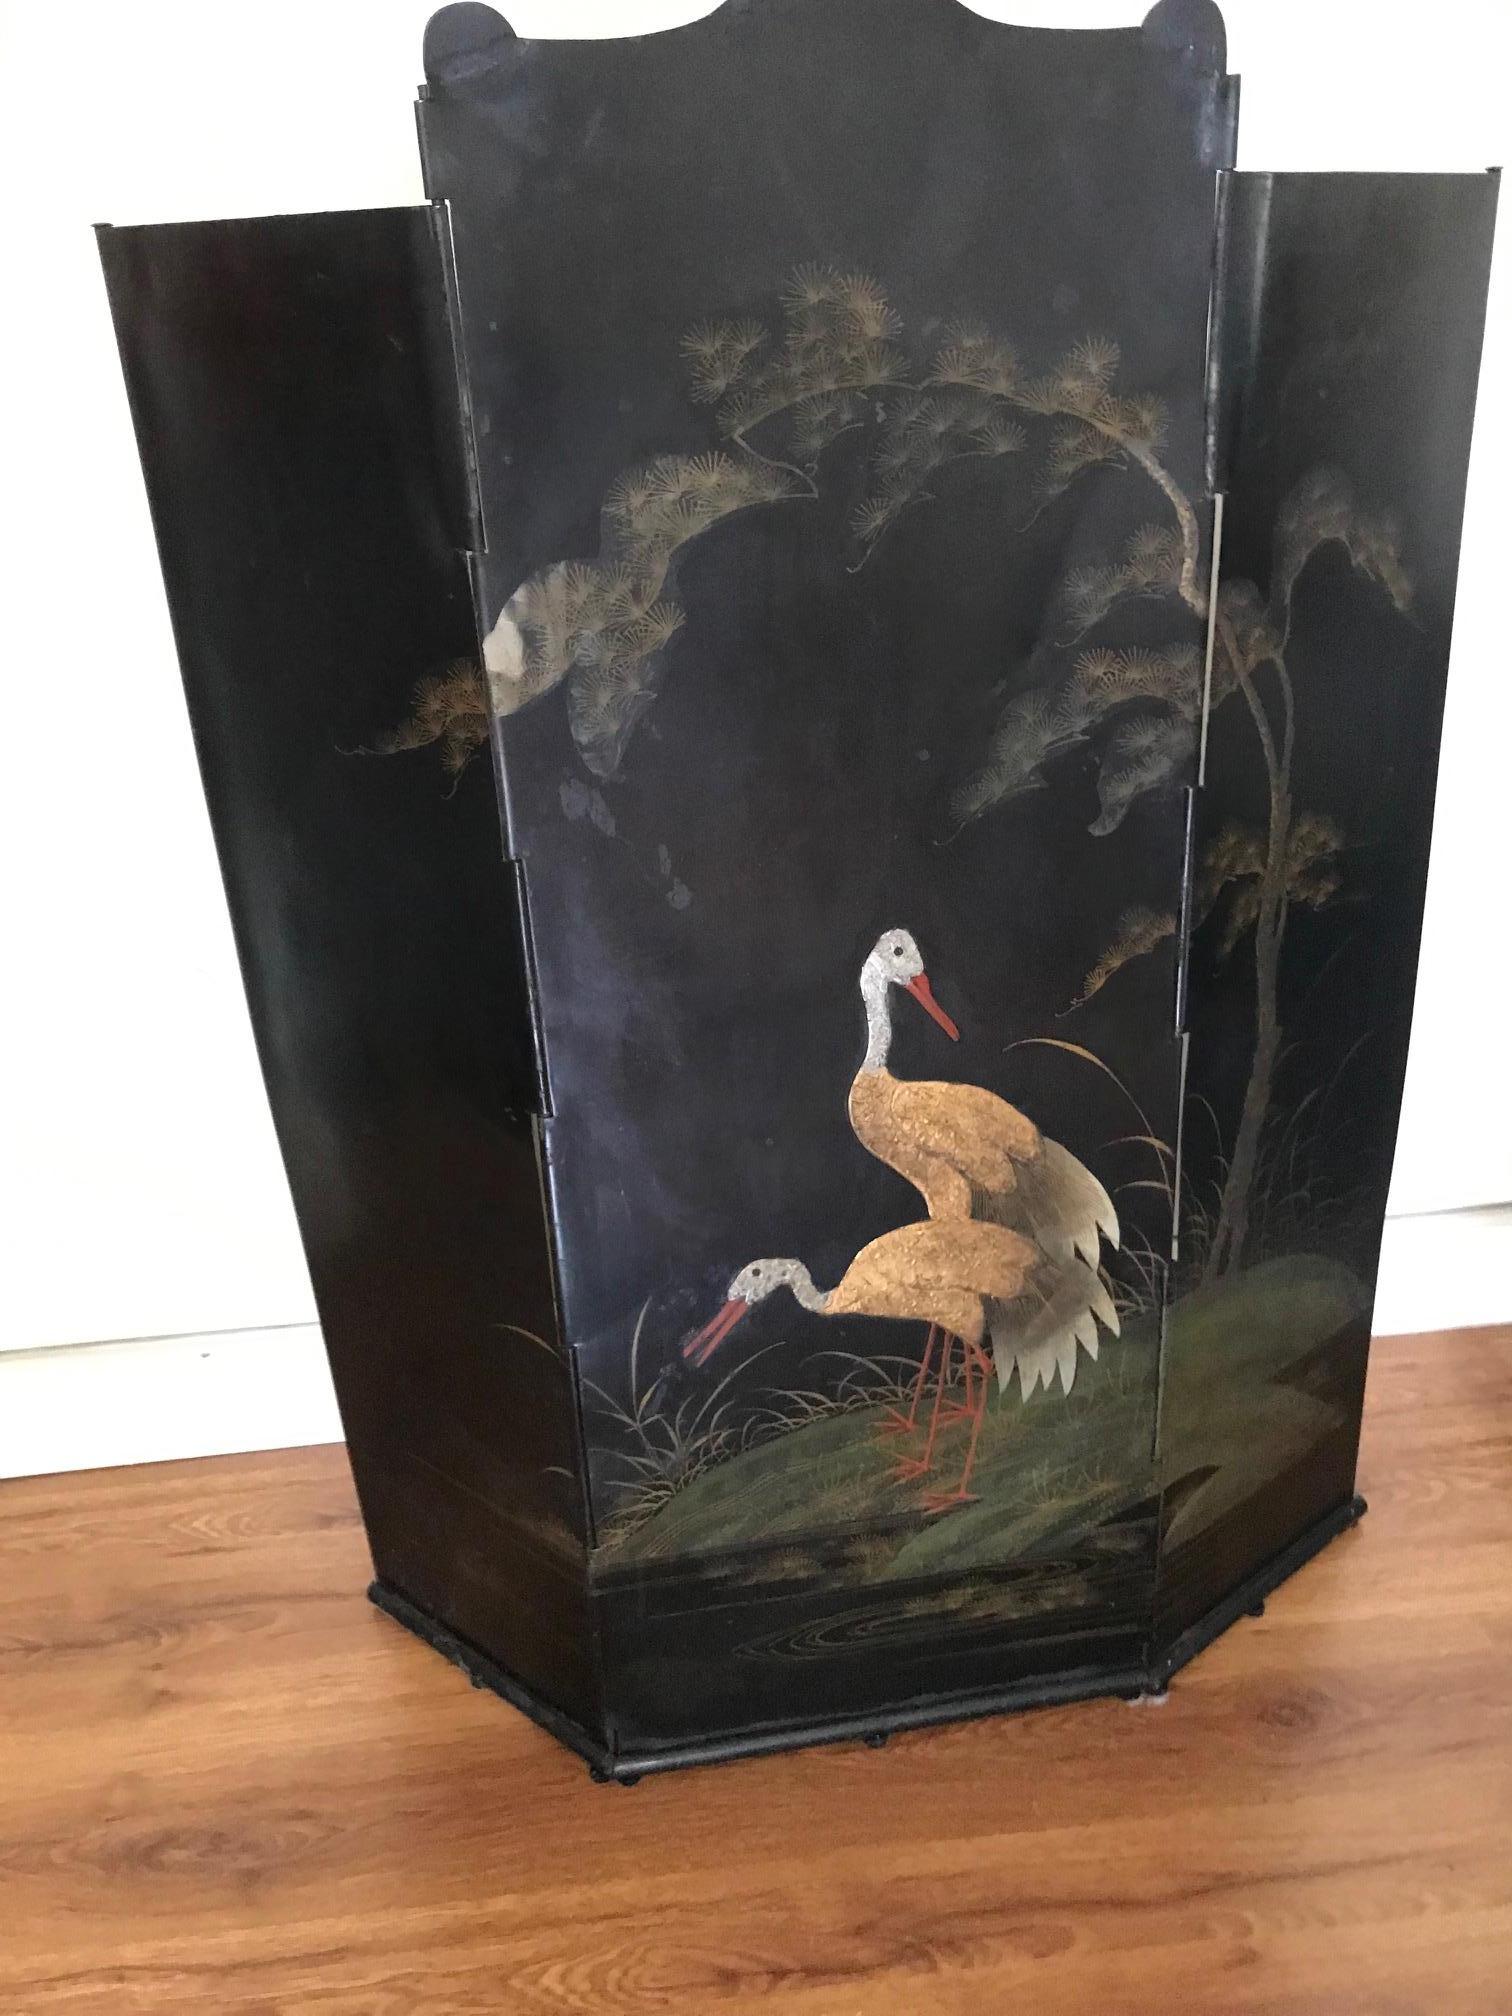 a beautyful french art nouveau fire screen with floral motifs and crane birds, France 1900-1920.